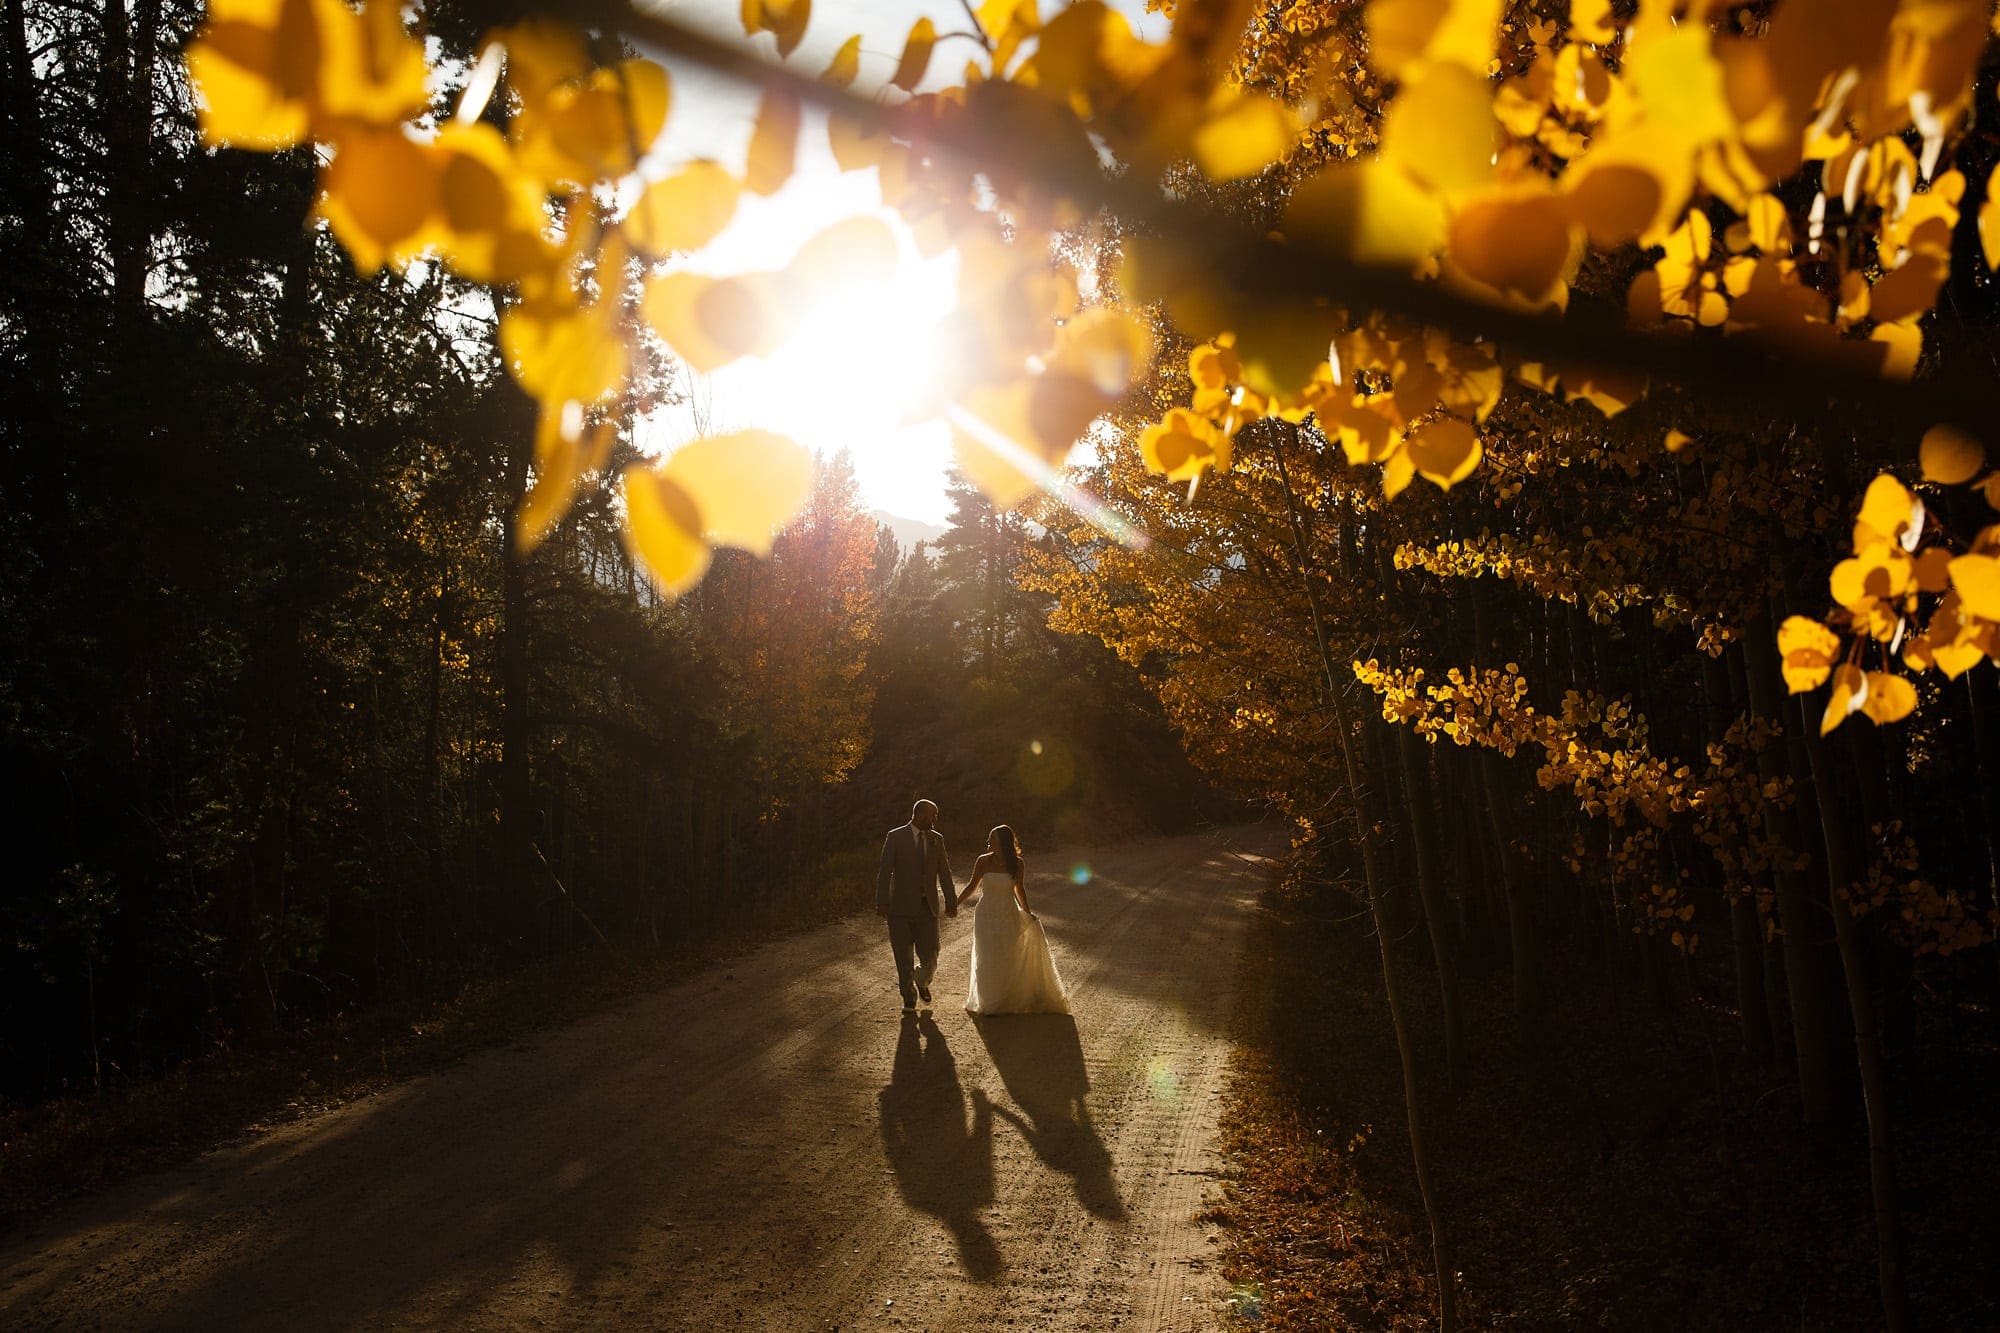 Frank and Heidi walk along a dirt road as the golden aspen trees are illuminated by the setting sun on Boreas Pass near Breckenridge during their wedding